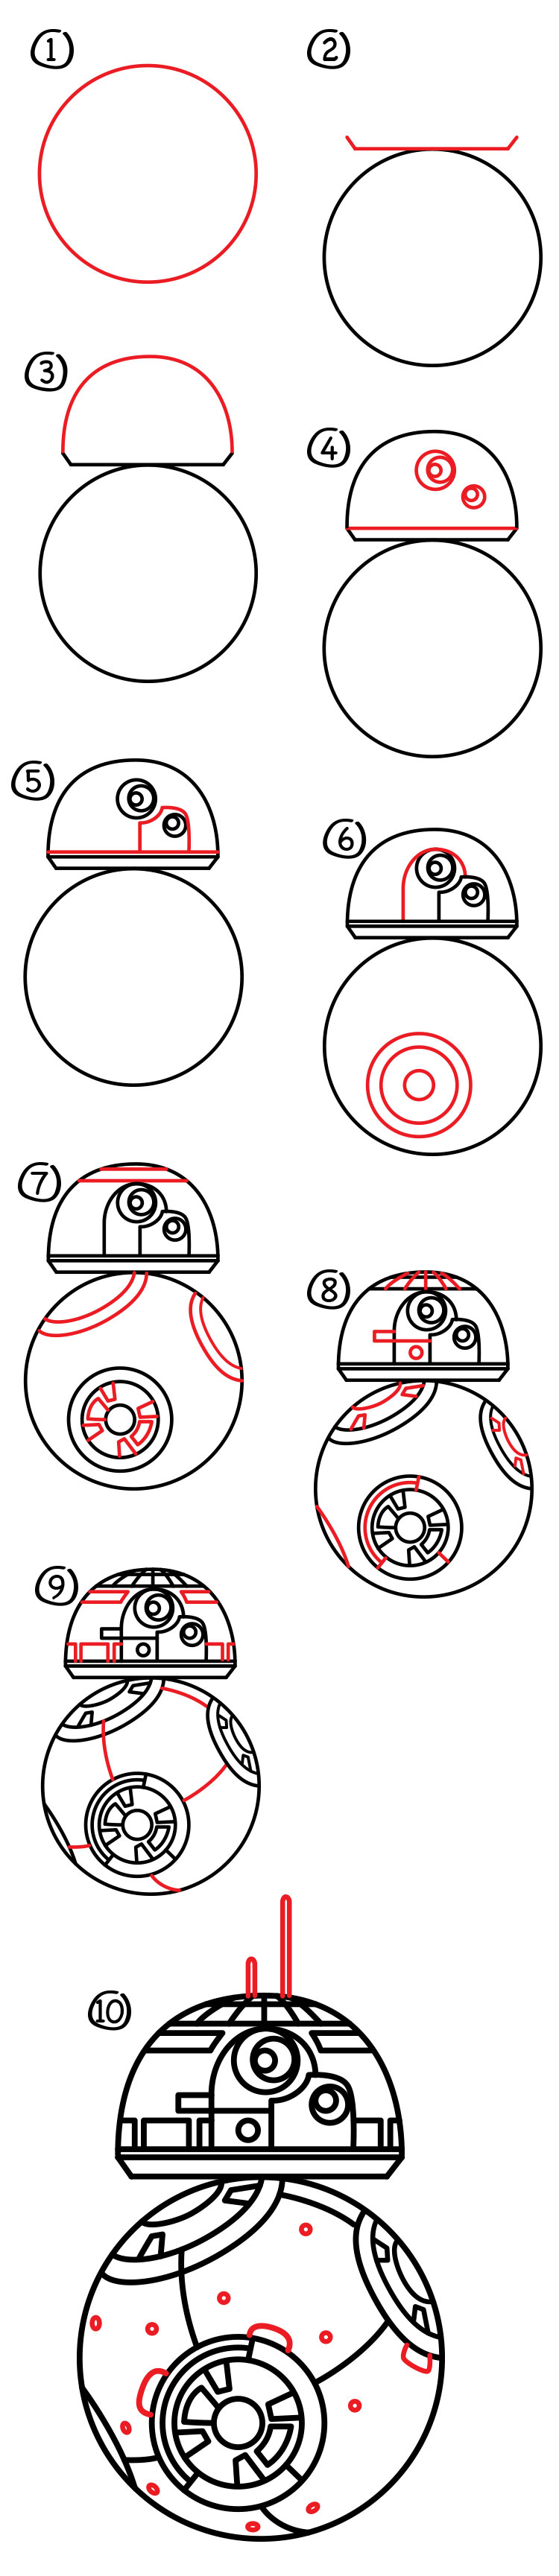 How To Draw BB8 From Star Wars Art For Kids Hub